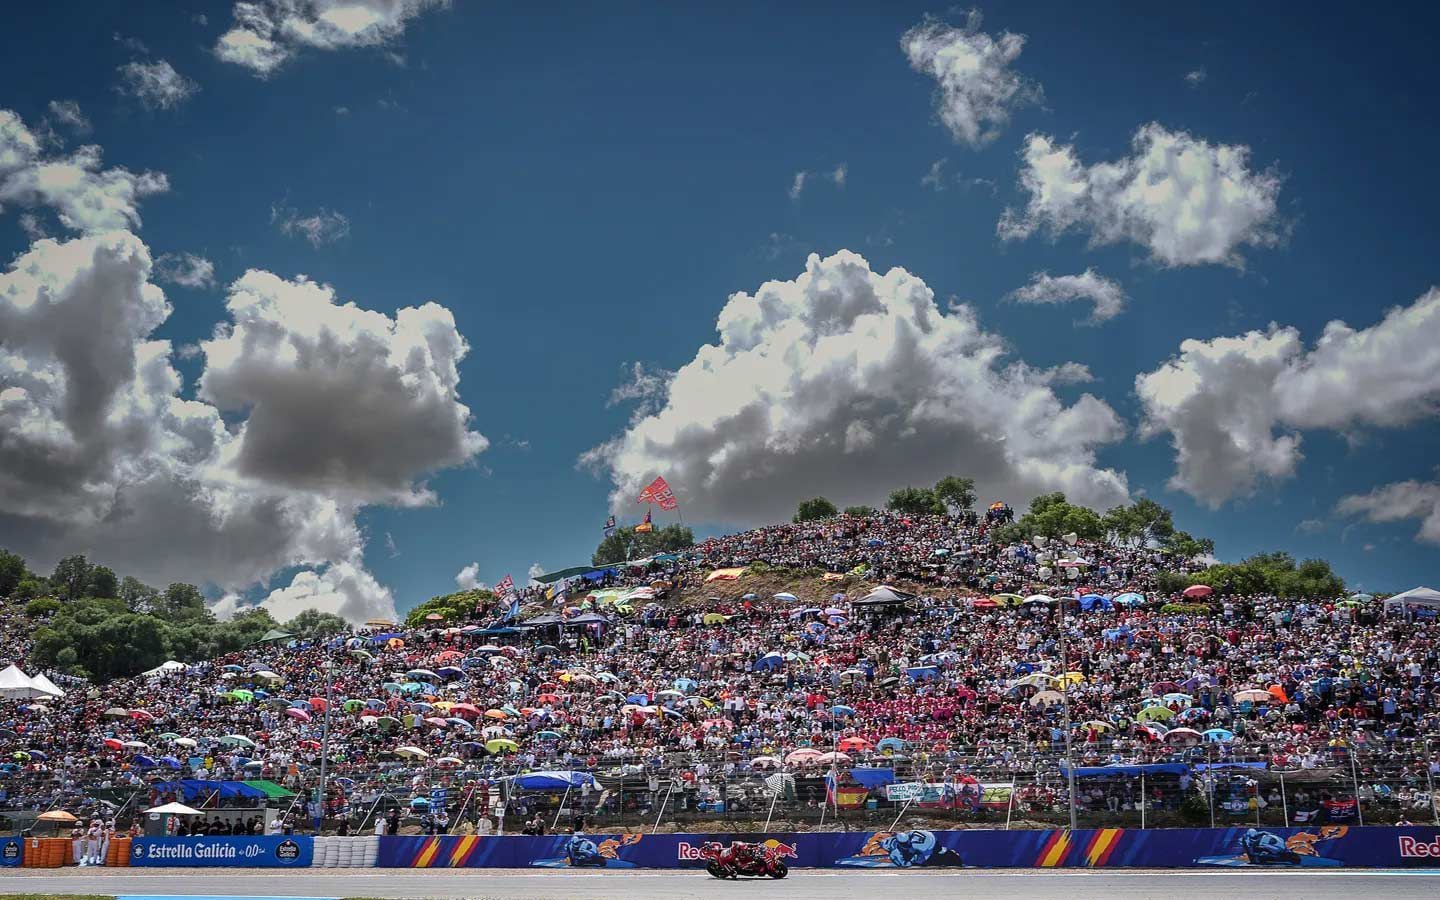 Jerez was packed to the rafters with a weekend attendance of 181,000 fans.